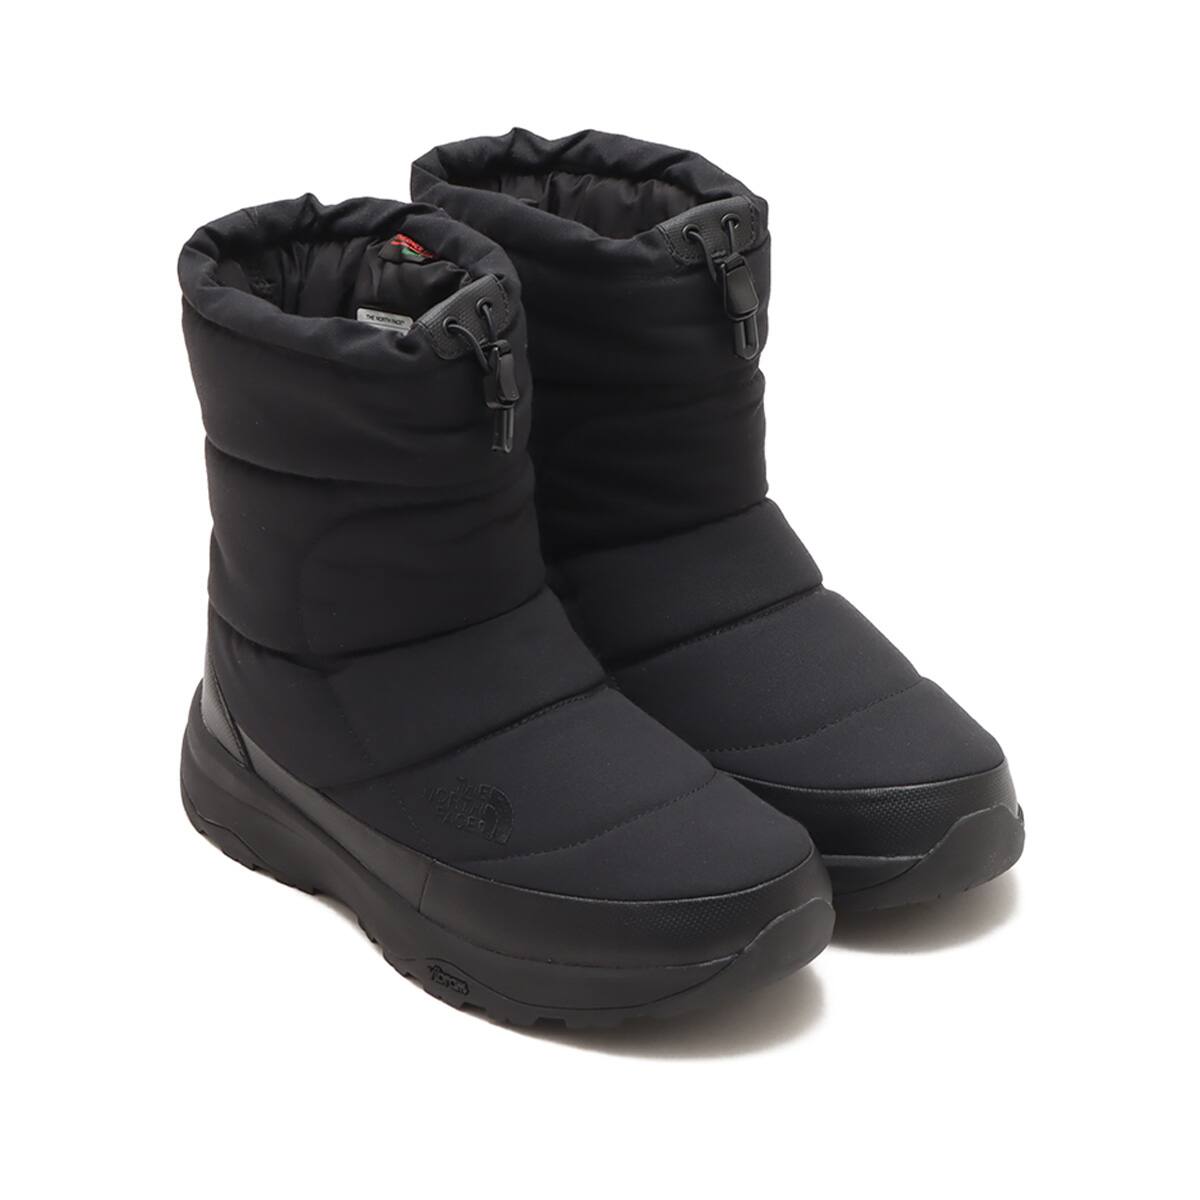 THE NORTH FACE NUPTSE BOOTIE WP VII ファイヤーフ 23FW-I